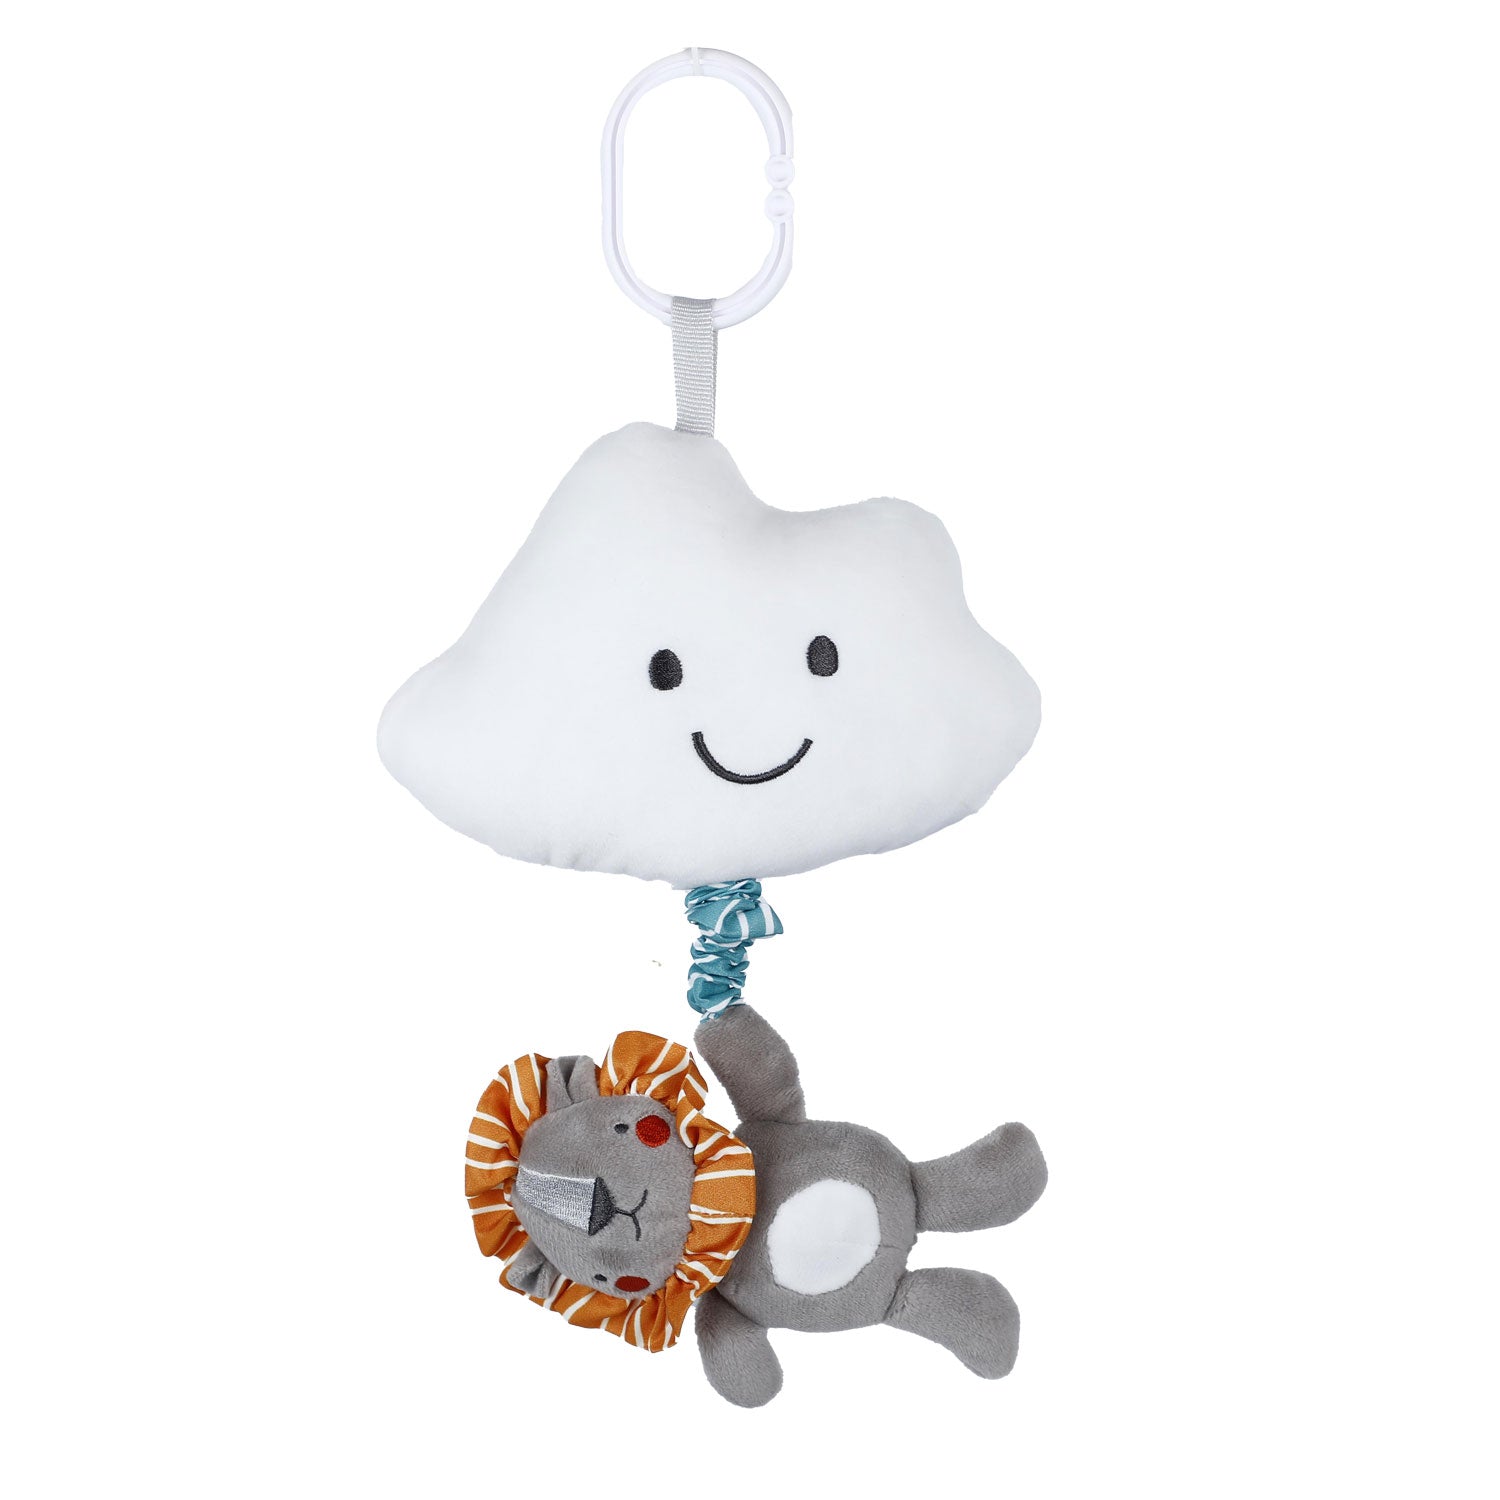 Baby Moo Smiling Cloud Hanging Musical Pulling Toy - Grey